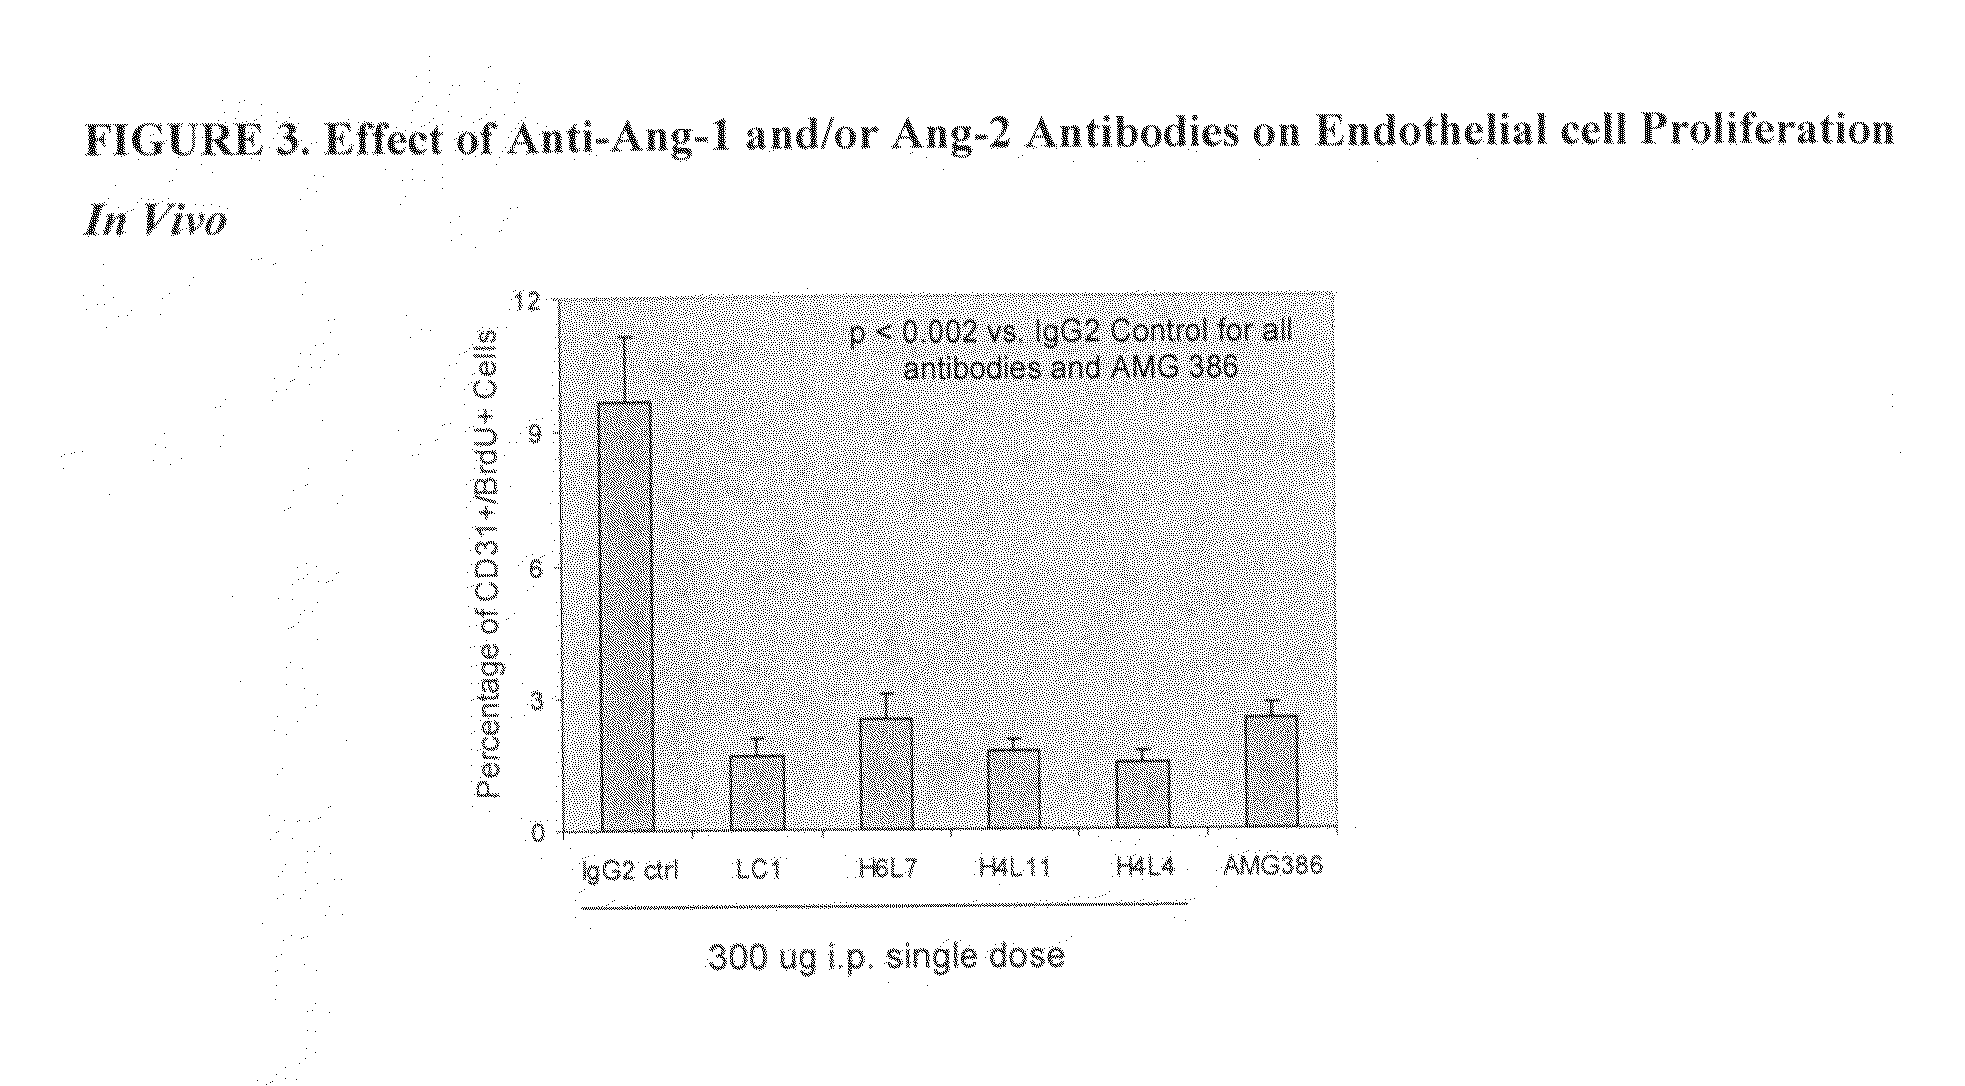 Antibodies directed to angiopoietin-1 and angiopoietin-2 and uses thereof